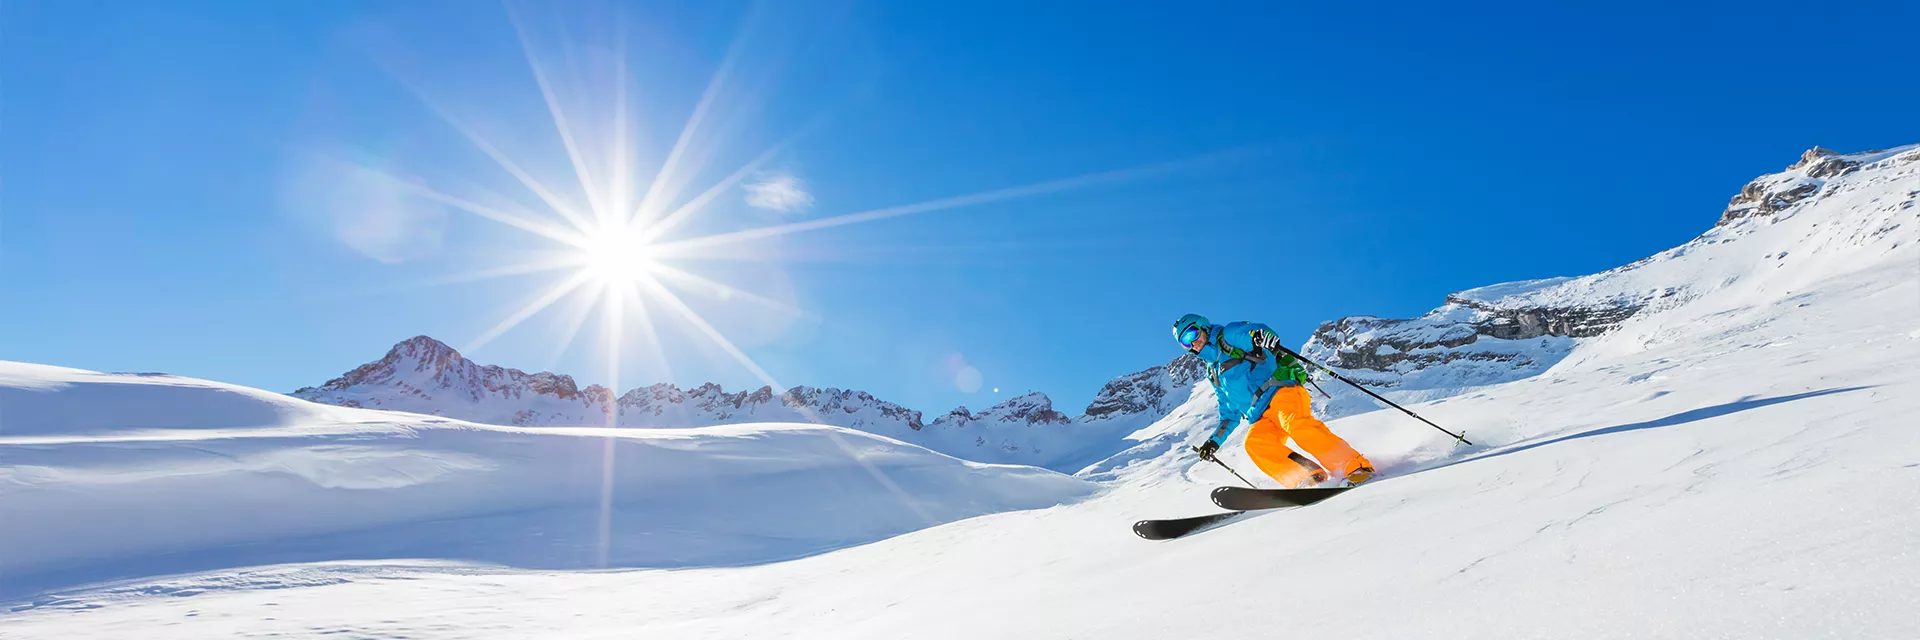 Your ski holiday in the Southern Alps